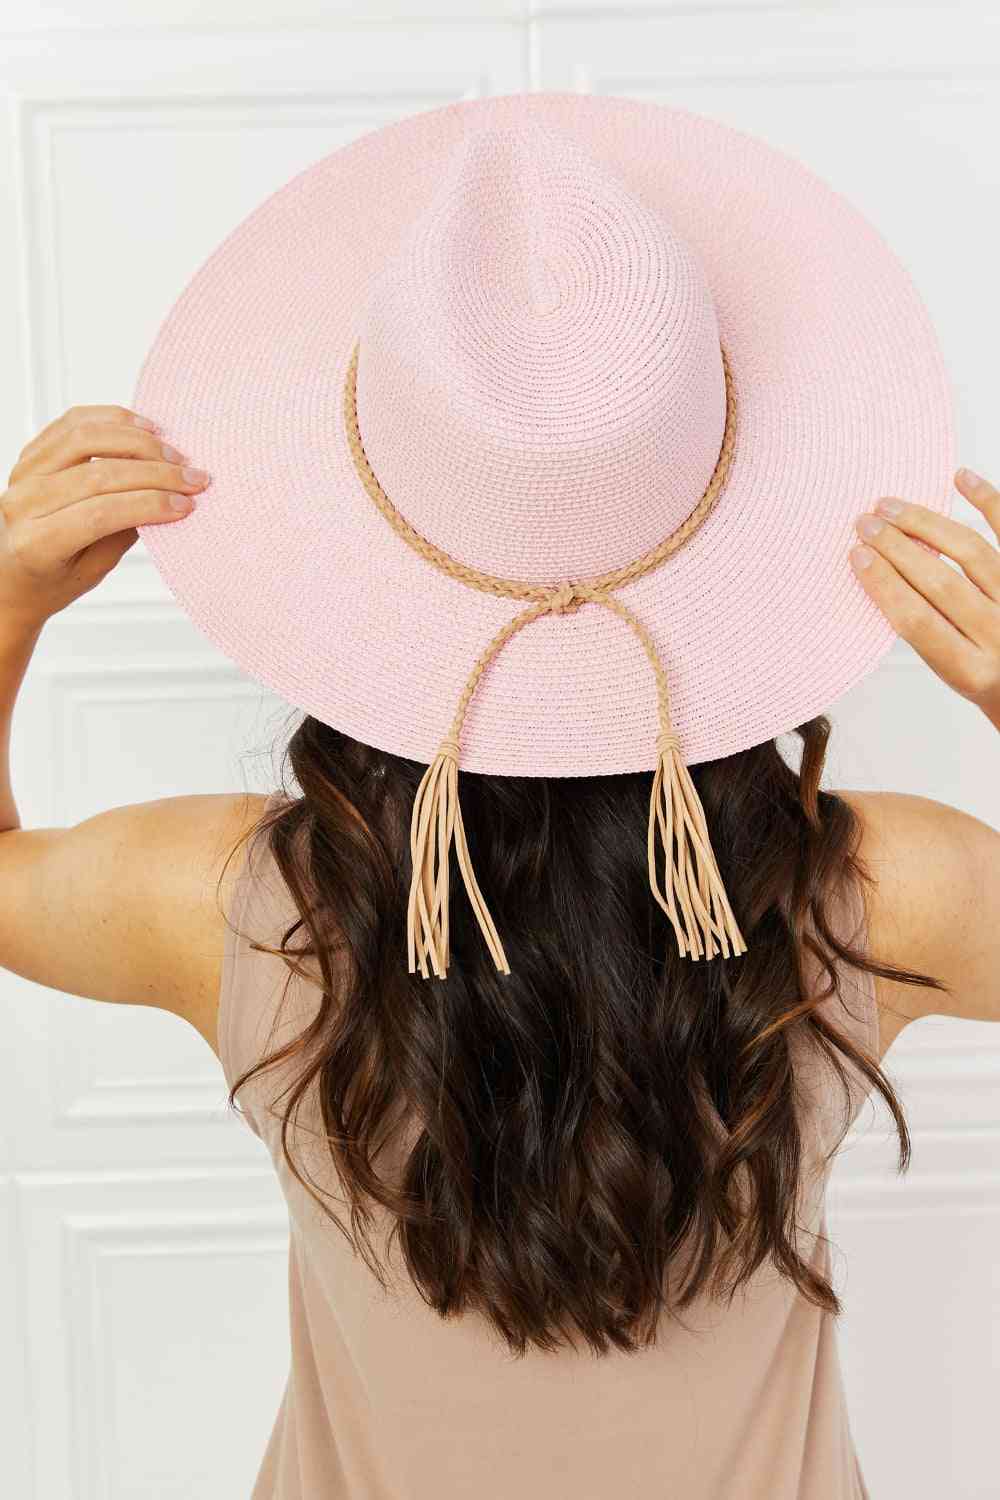 Fame Route To Paradise Straw Hat - Scarlett's Riverside Boutique